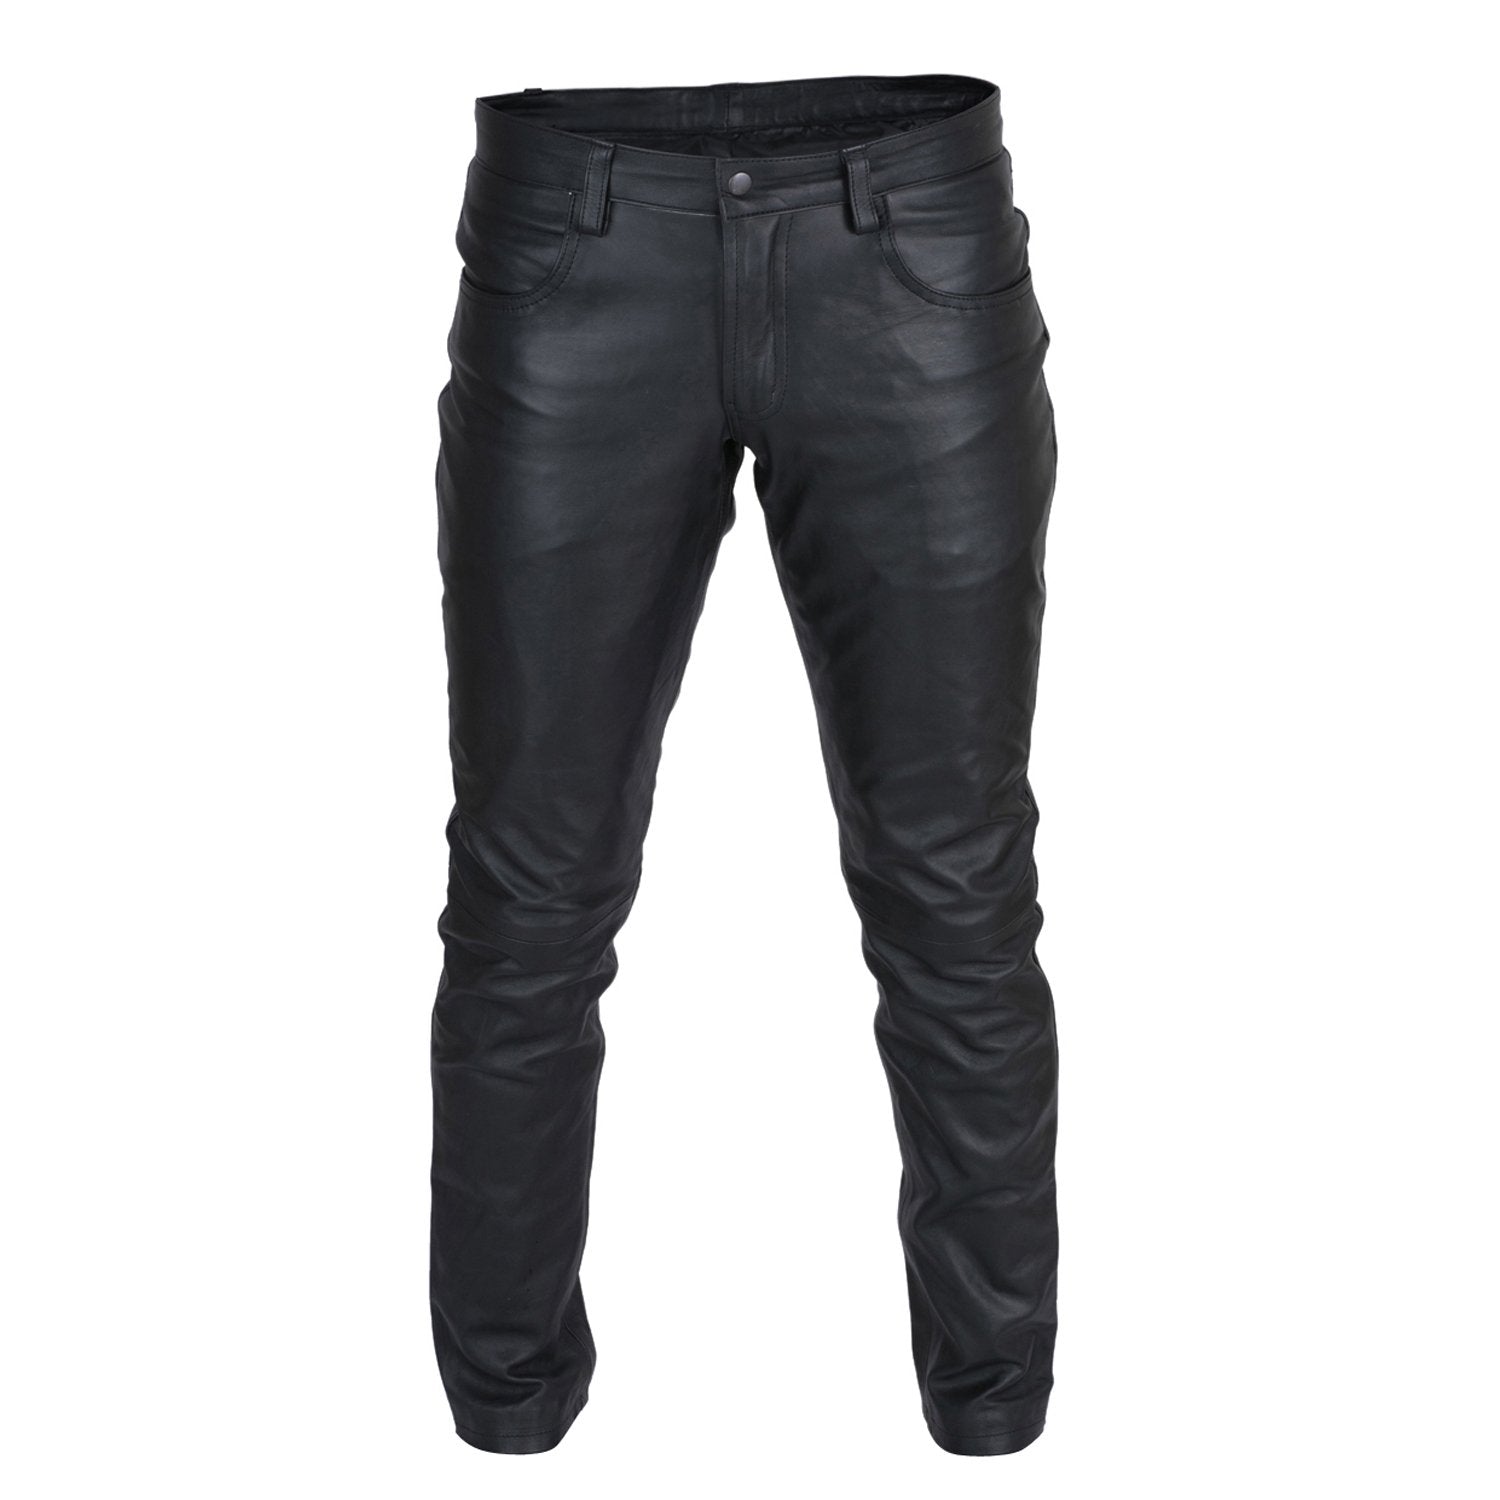 Mens Black Fashion Leather Quilted Pants